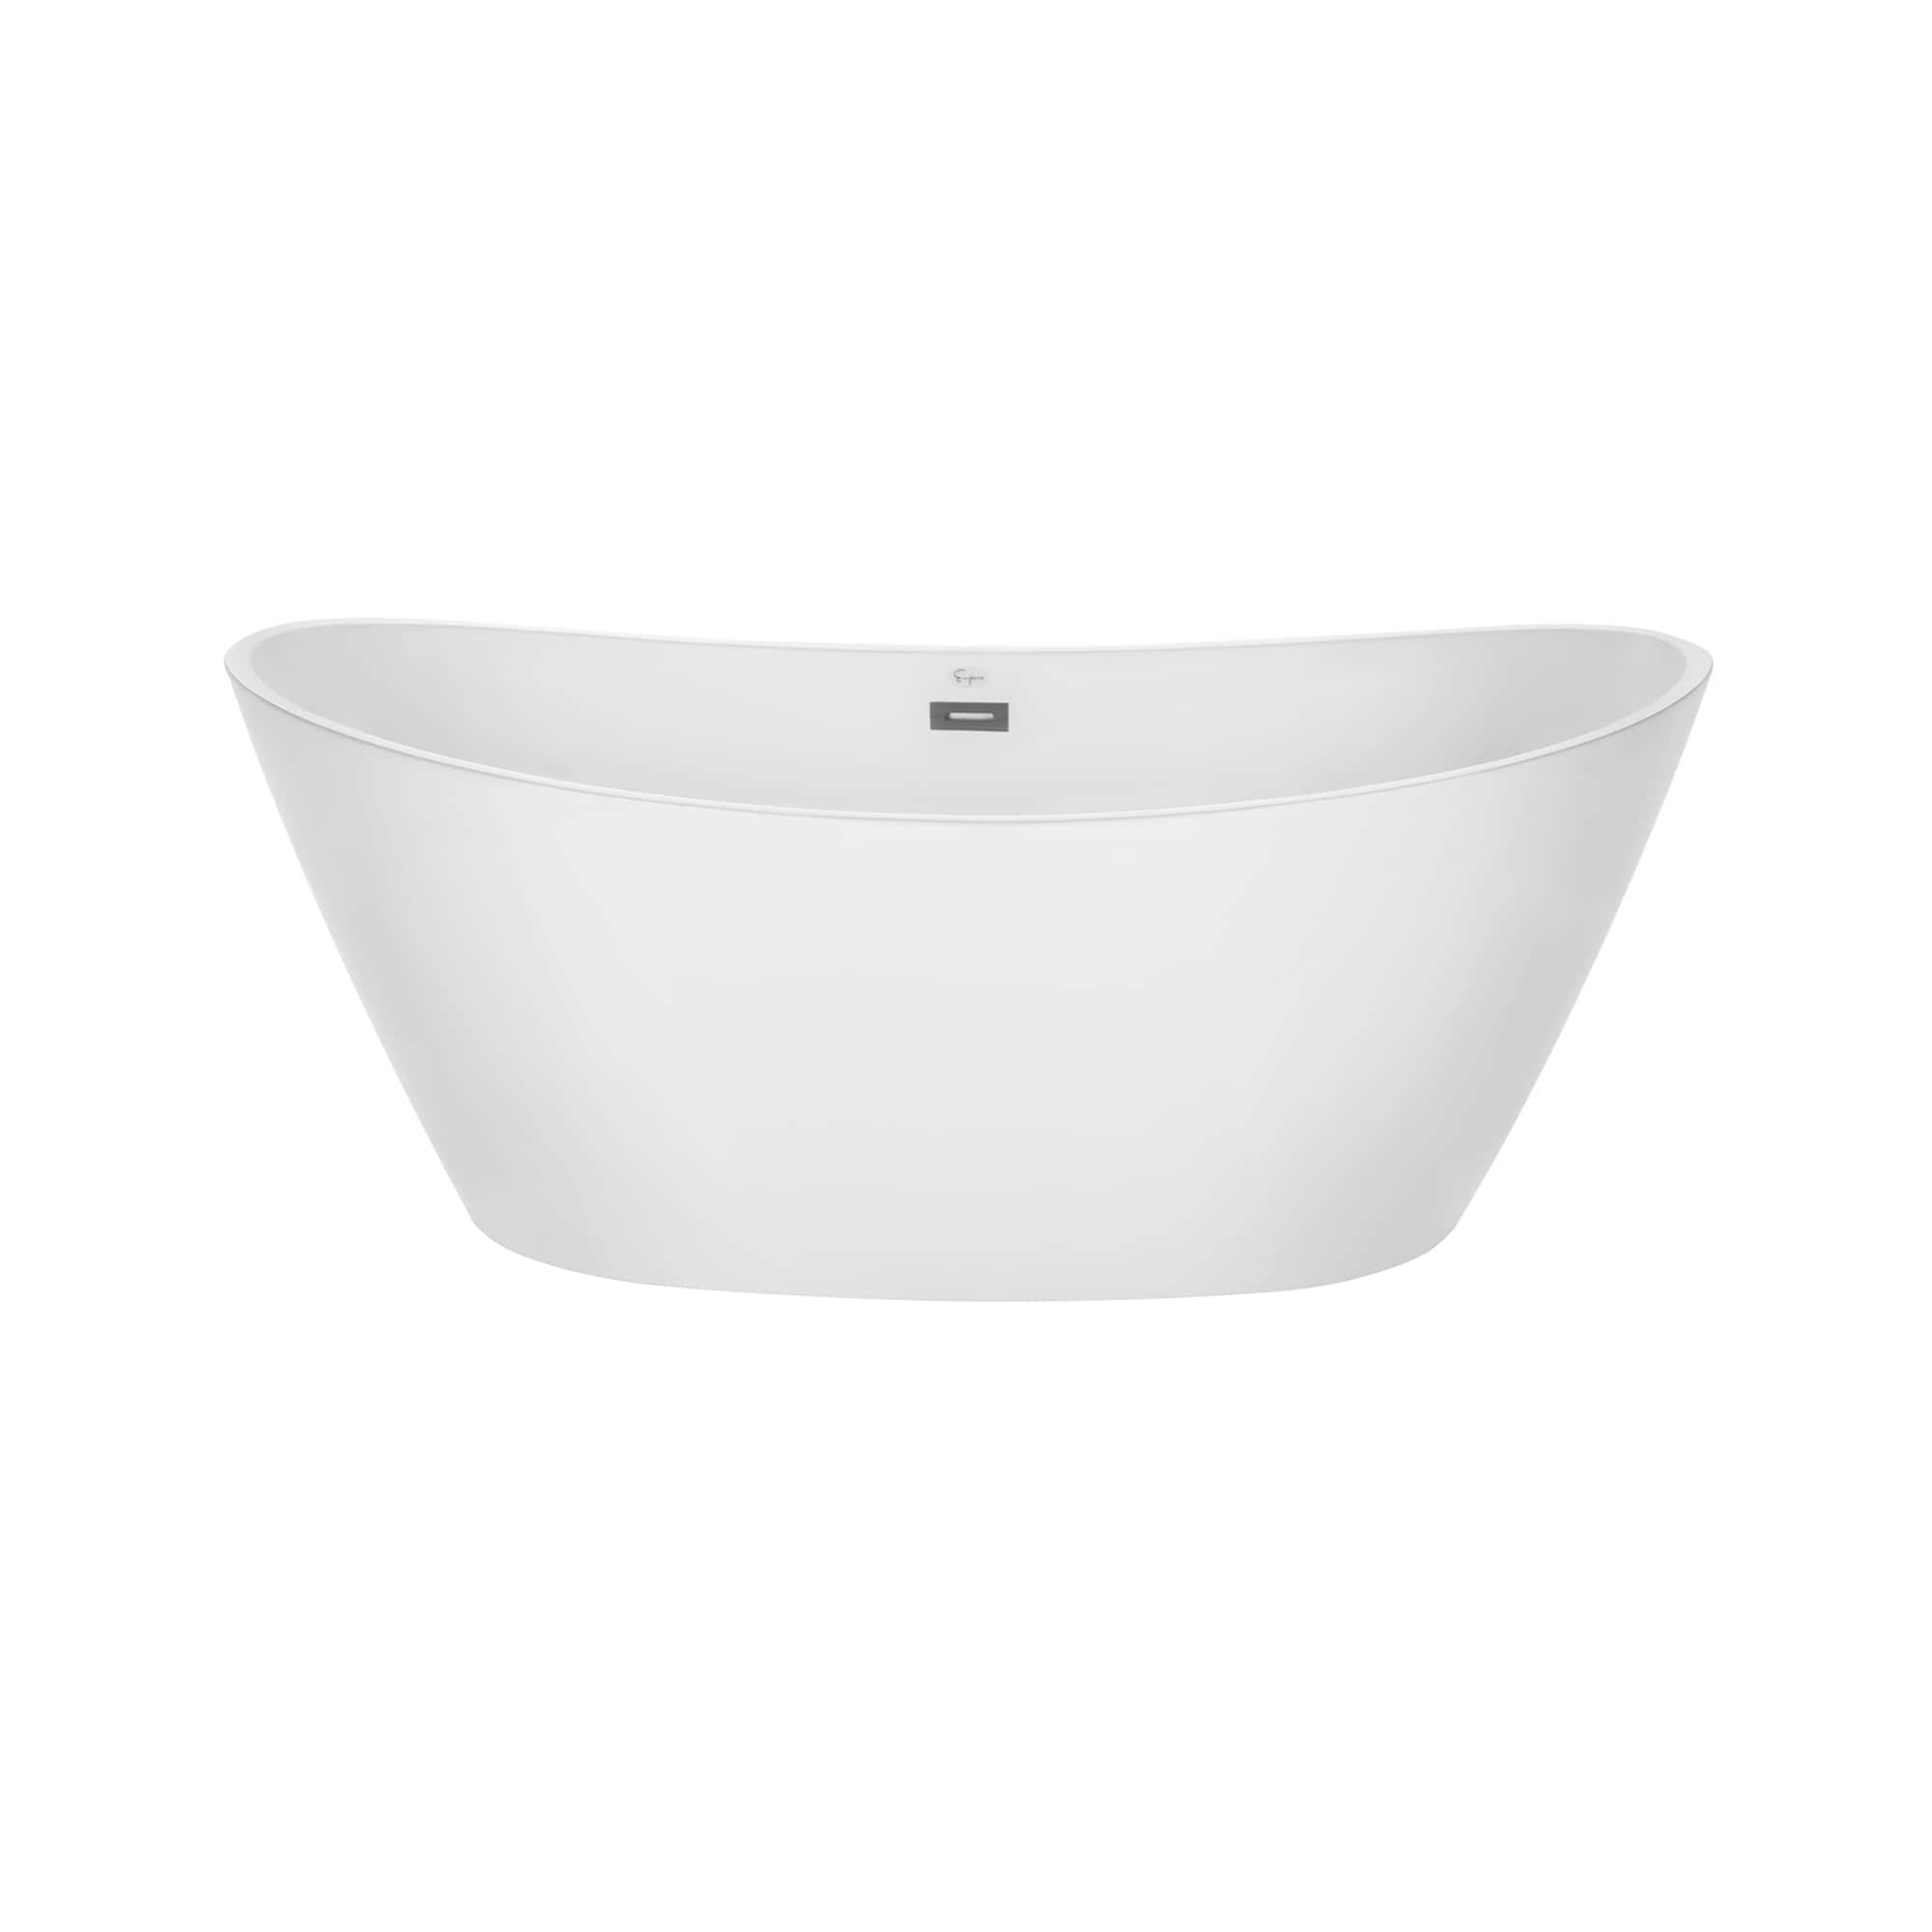 Empava-59FT1518 luxury freestanding acrylic soaking oval modern double-ended bathtub front view